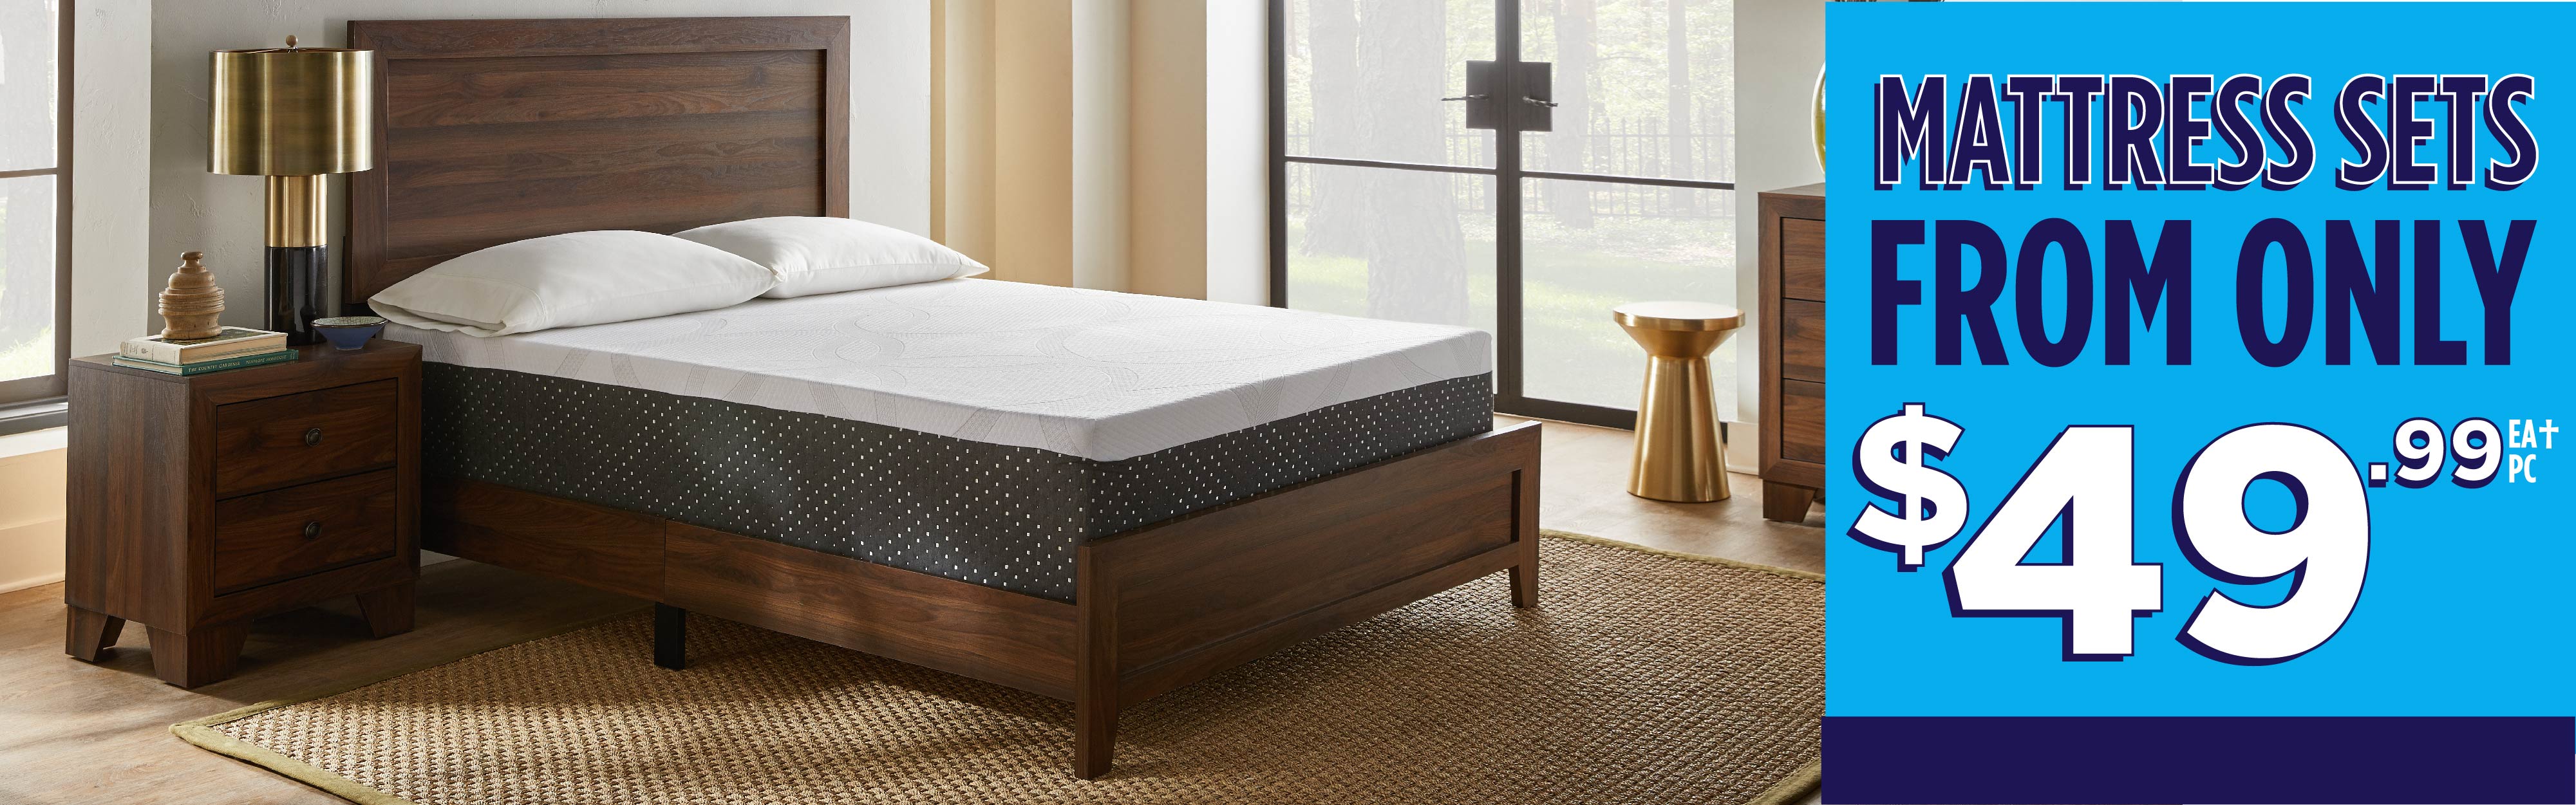 Mattress Sets from only $49.99!